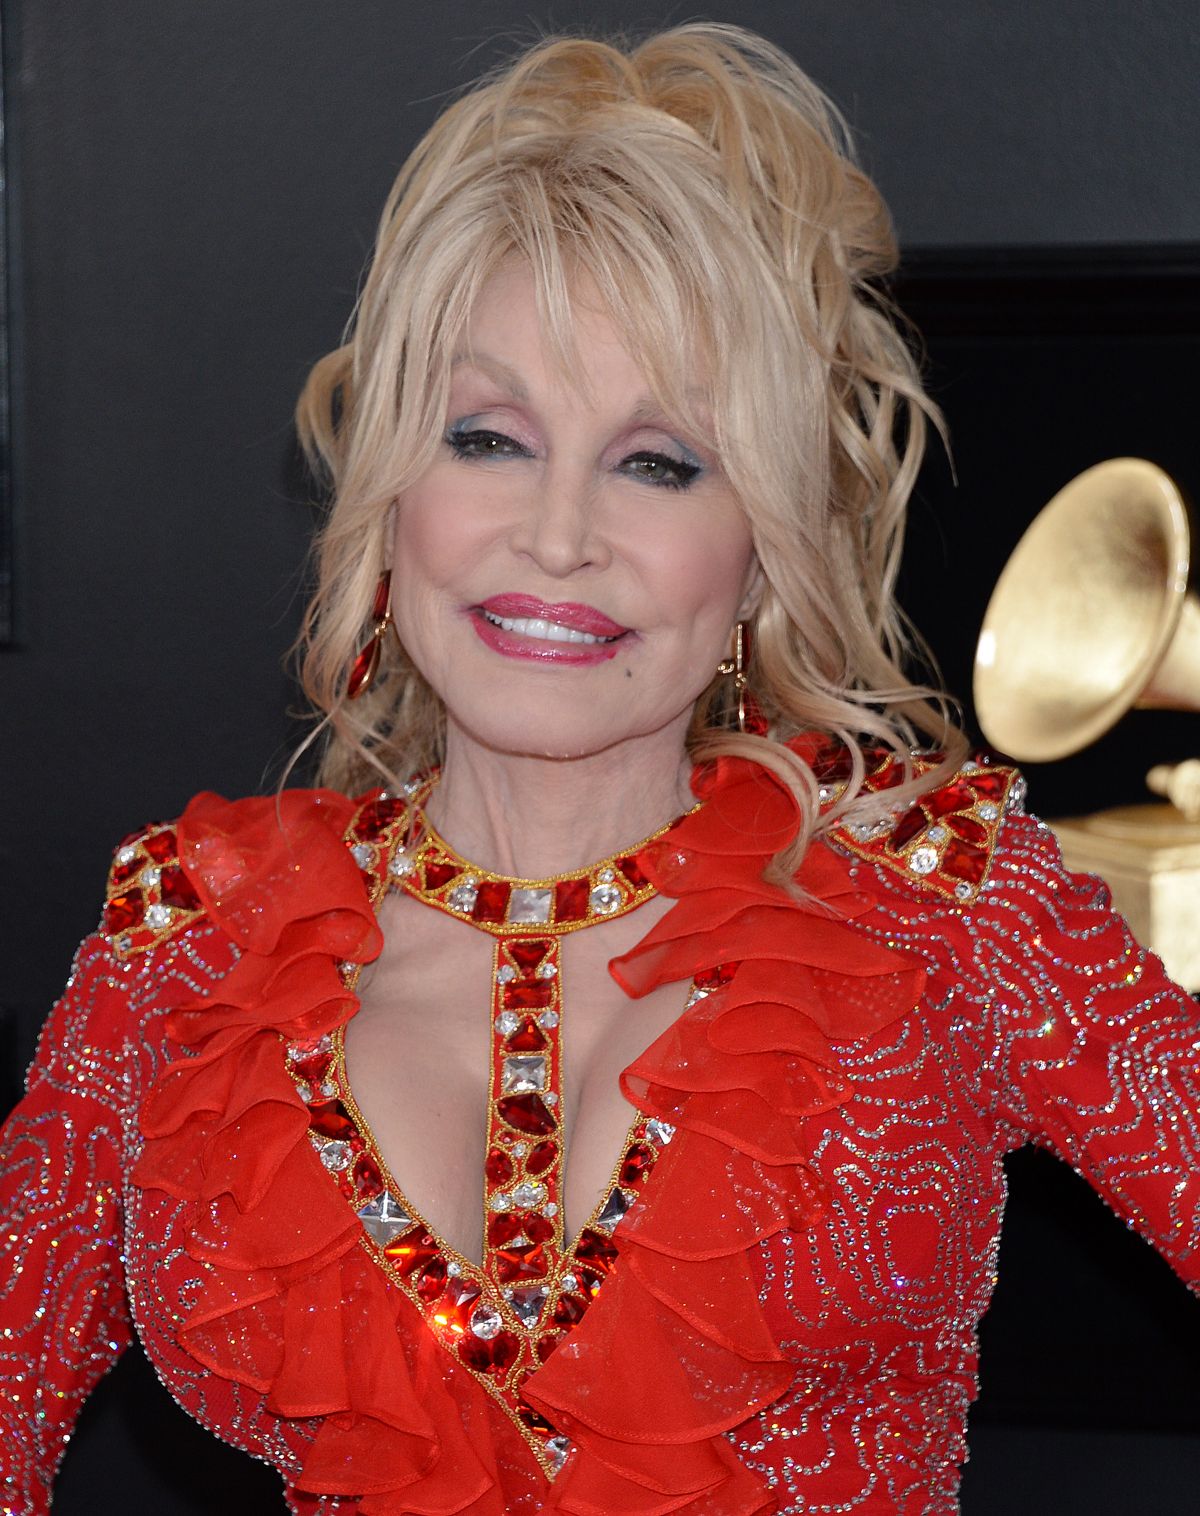 DOLLY PARTON at 61st Annual Grammy Awards in Los Angeles 02/10/2019